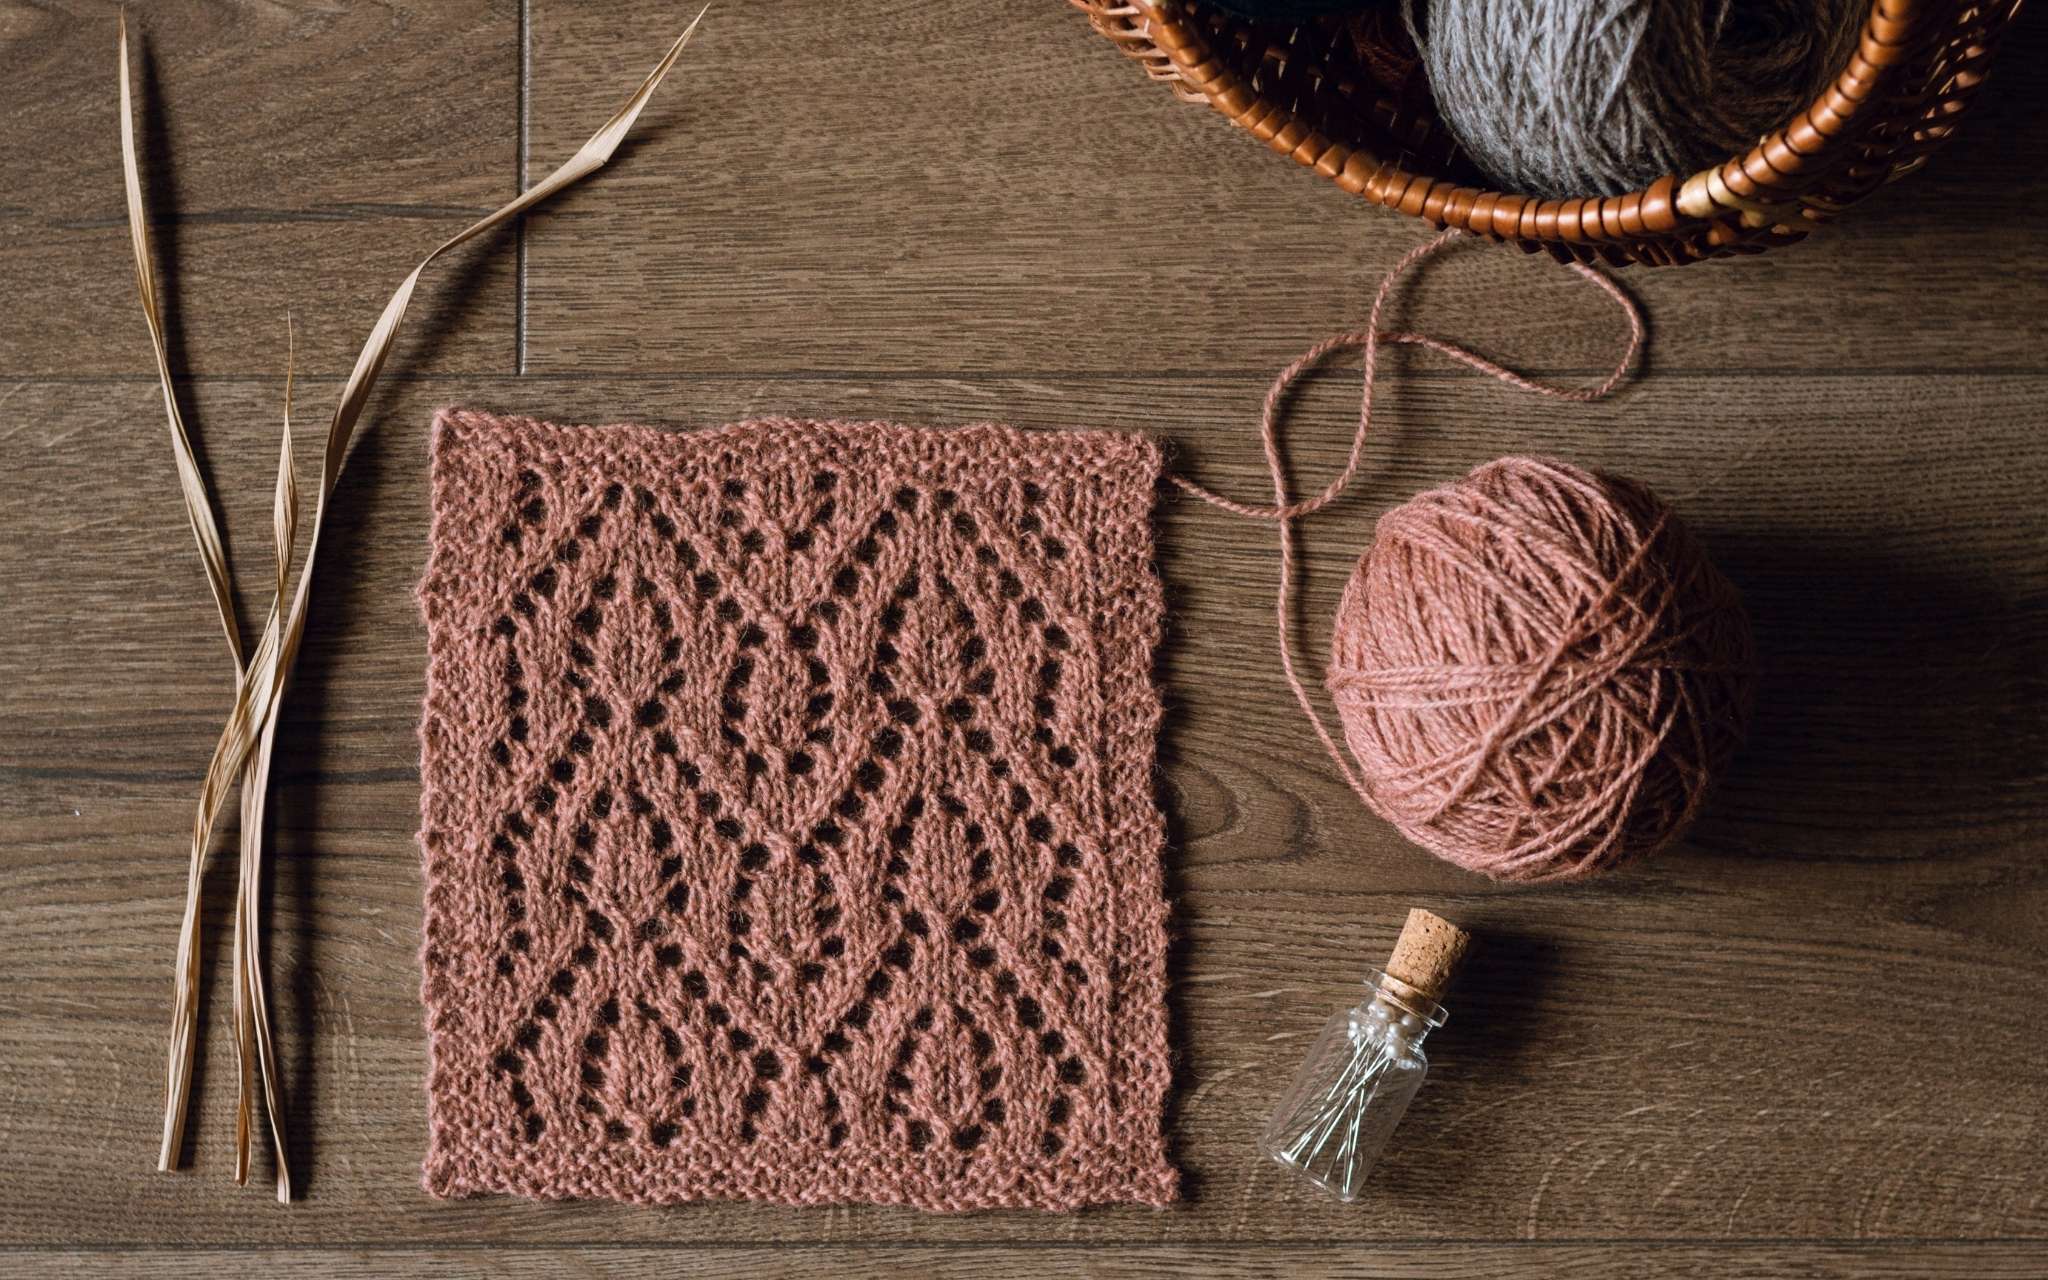 A swatch of lace in coral laid flat on a wooden surface. There are some dried stems, scissors and a bottle of pints to the side.